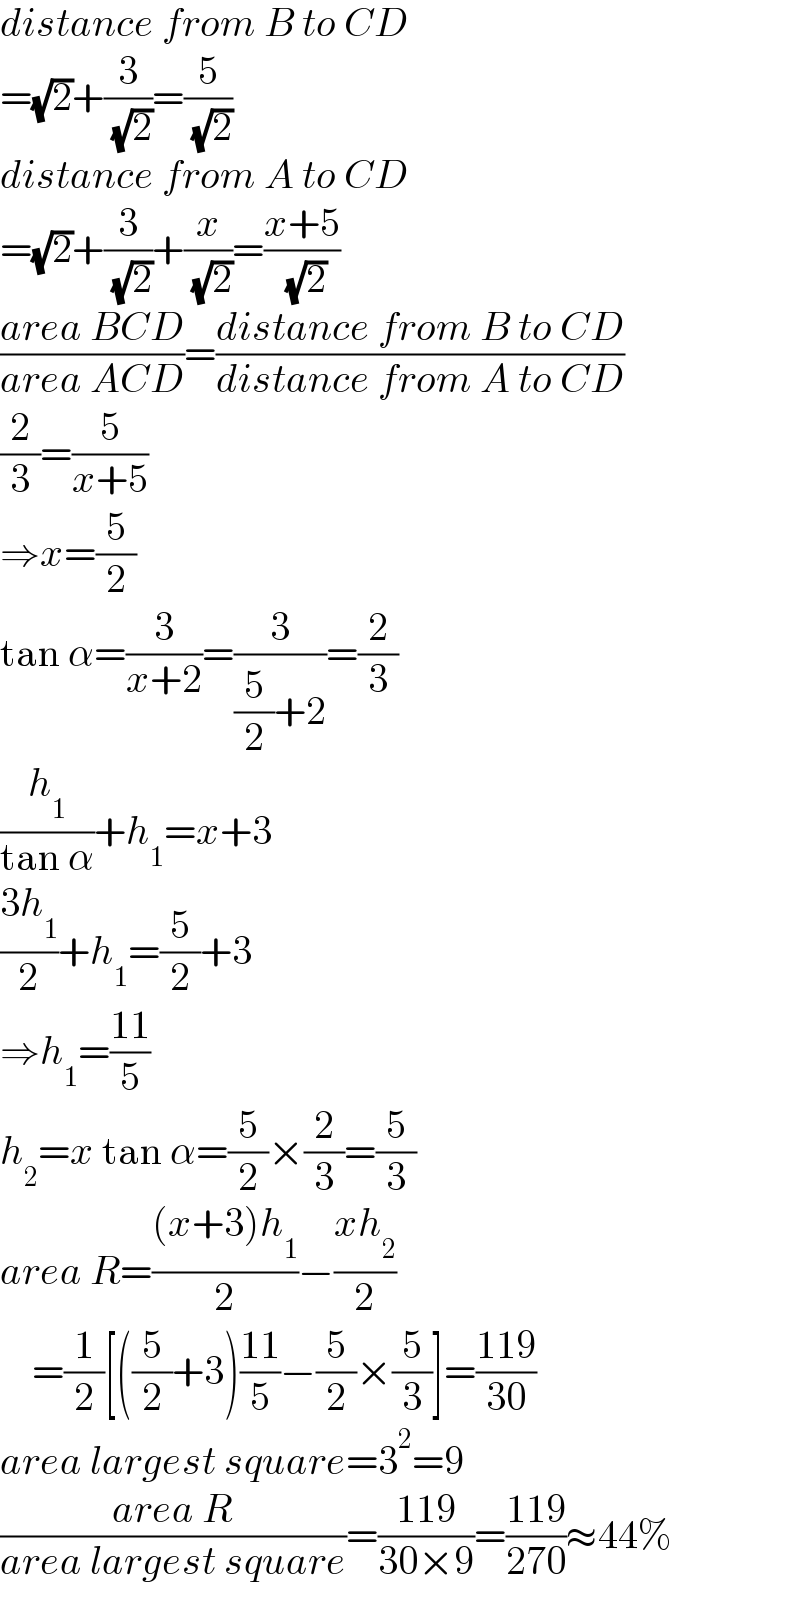 distance from B to CD  =(√2)+(3/( (√2)))=(5/( (√2)))  distance from A to CD  =(√2)+(3/( (√2)))+(x/( (√2)))=((x+5)/( (√2)))  ((area BCD)/(area ACD))=((distance from B to CD)/(distance from A to CD))  (2/3)=(5/(x+5))  ⇒x=(5/2)  tan α=(3/(x+2))=(3/((5/2)+2))=(2/3)  (h_1 /(tan α))+h_1 =x+3  ((3h_1 )/2)+h_1 =(5/2)+3  ⇒h_1 =((11)/5)  h_2 =x tan α=(5/2)×(2/3)=(5/3)  area R=(((x+3)h_1 )/2)−((xh_2 )/2)      =(1/2)[((5/2)+3)((11)/5)−(5/2)×(5/3)]=((119)/(30))  area largest square=3^2 =9  ((area R)/(area largest square))=((119)/(30×9))=((119)/(270))≈44%  